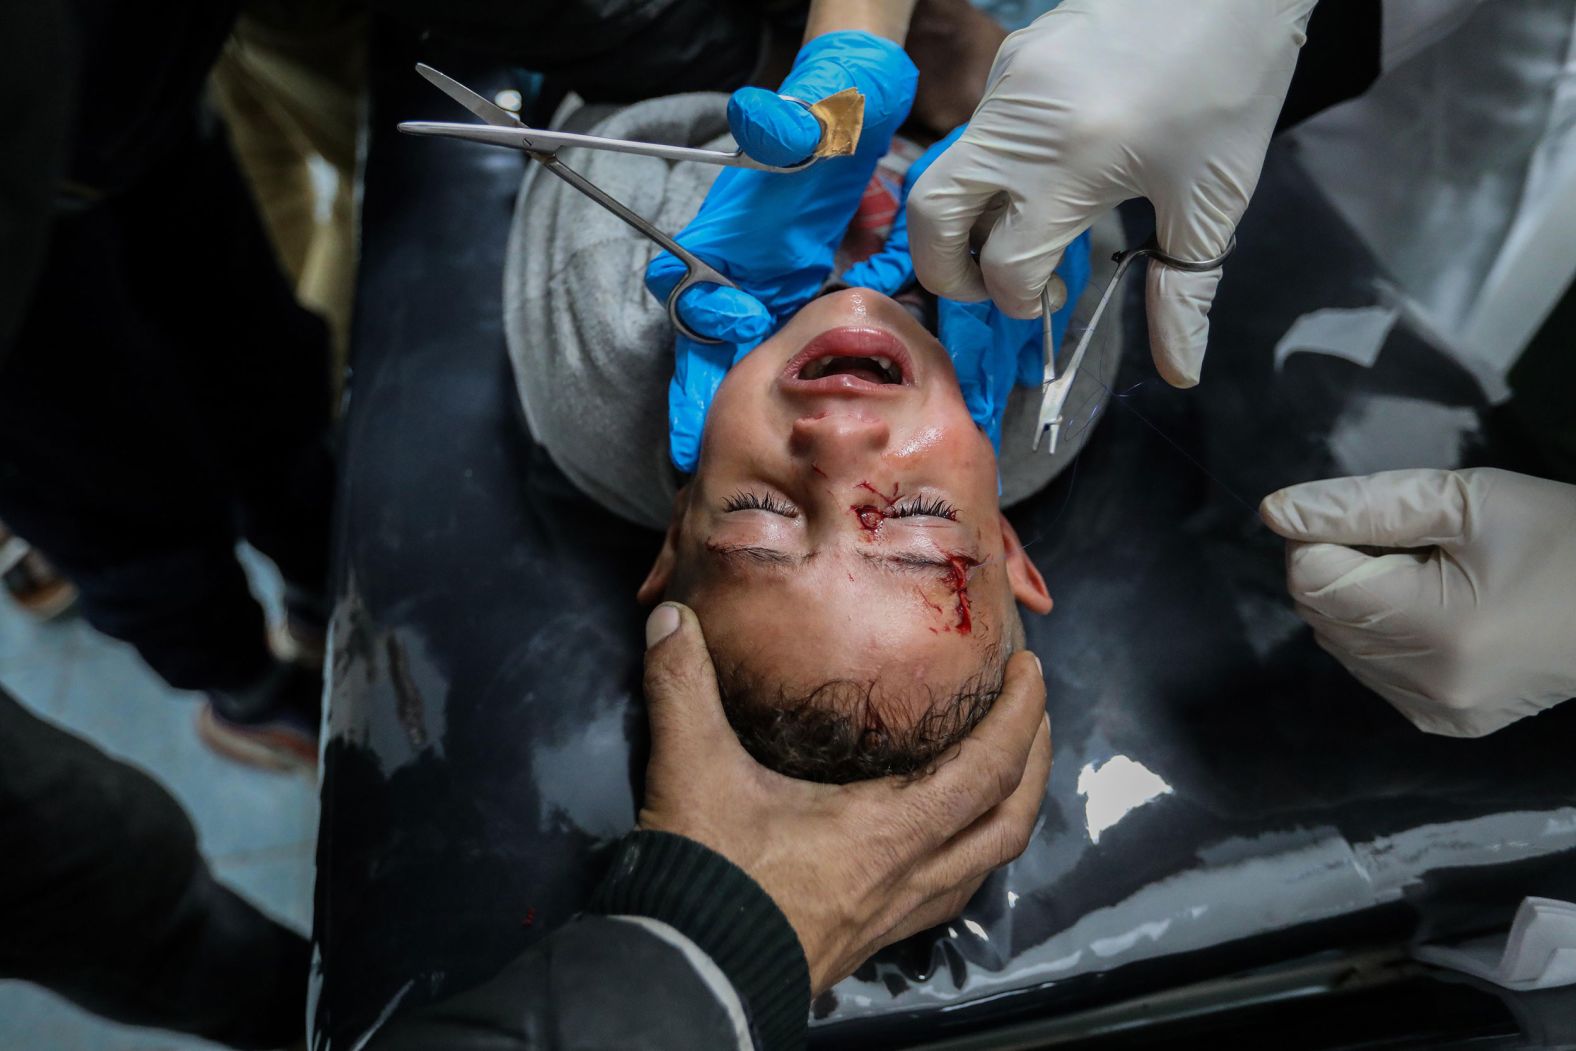 An injured Palestinian child receives treatment at a hospital in Rafah, Gaza, after Israeli airstrikes on Wednesday, February 7. In October, the Palestinian militant group Hamas <a href="index.php?page=&url=https%3A%2F%2Fwww.cnn.com%2F2023%2F10%2F07%2Fmiddleeast%2Fsirens-israel-rocket-attack-gaza-intl-hnk%2Findex.html">launched a brutal assault on Israel</a>, killing more than 1,200 people and kidnapping about 240, according to Israeli authorities. <a href="index.php?page=&url=https%3A%2F%2Fwww.cnn.com%2Fmiddleeast%2Flive-news%2Fisrael-hamas-war-gaza-news-01-21-24%2Fh_0ed5ce16dff974f59e66908023fd08c1">Israel’s retaliation has been lethal</a>, with an air and ground campaign in Gaza, which Hamas has controlled since 2007.